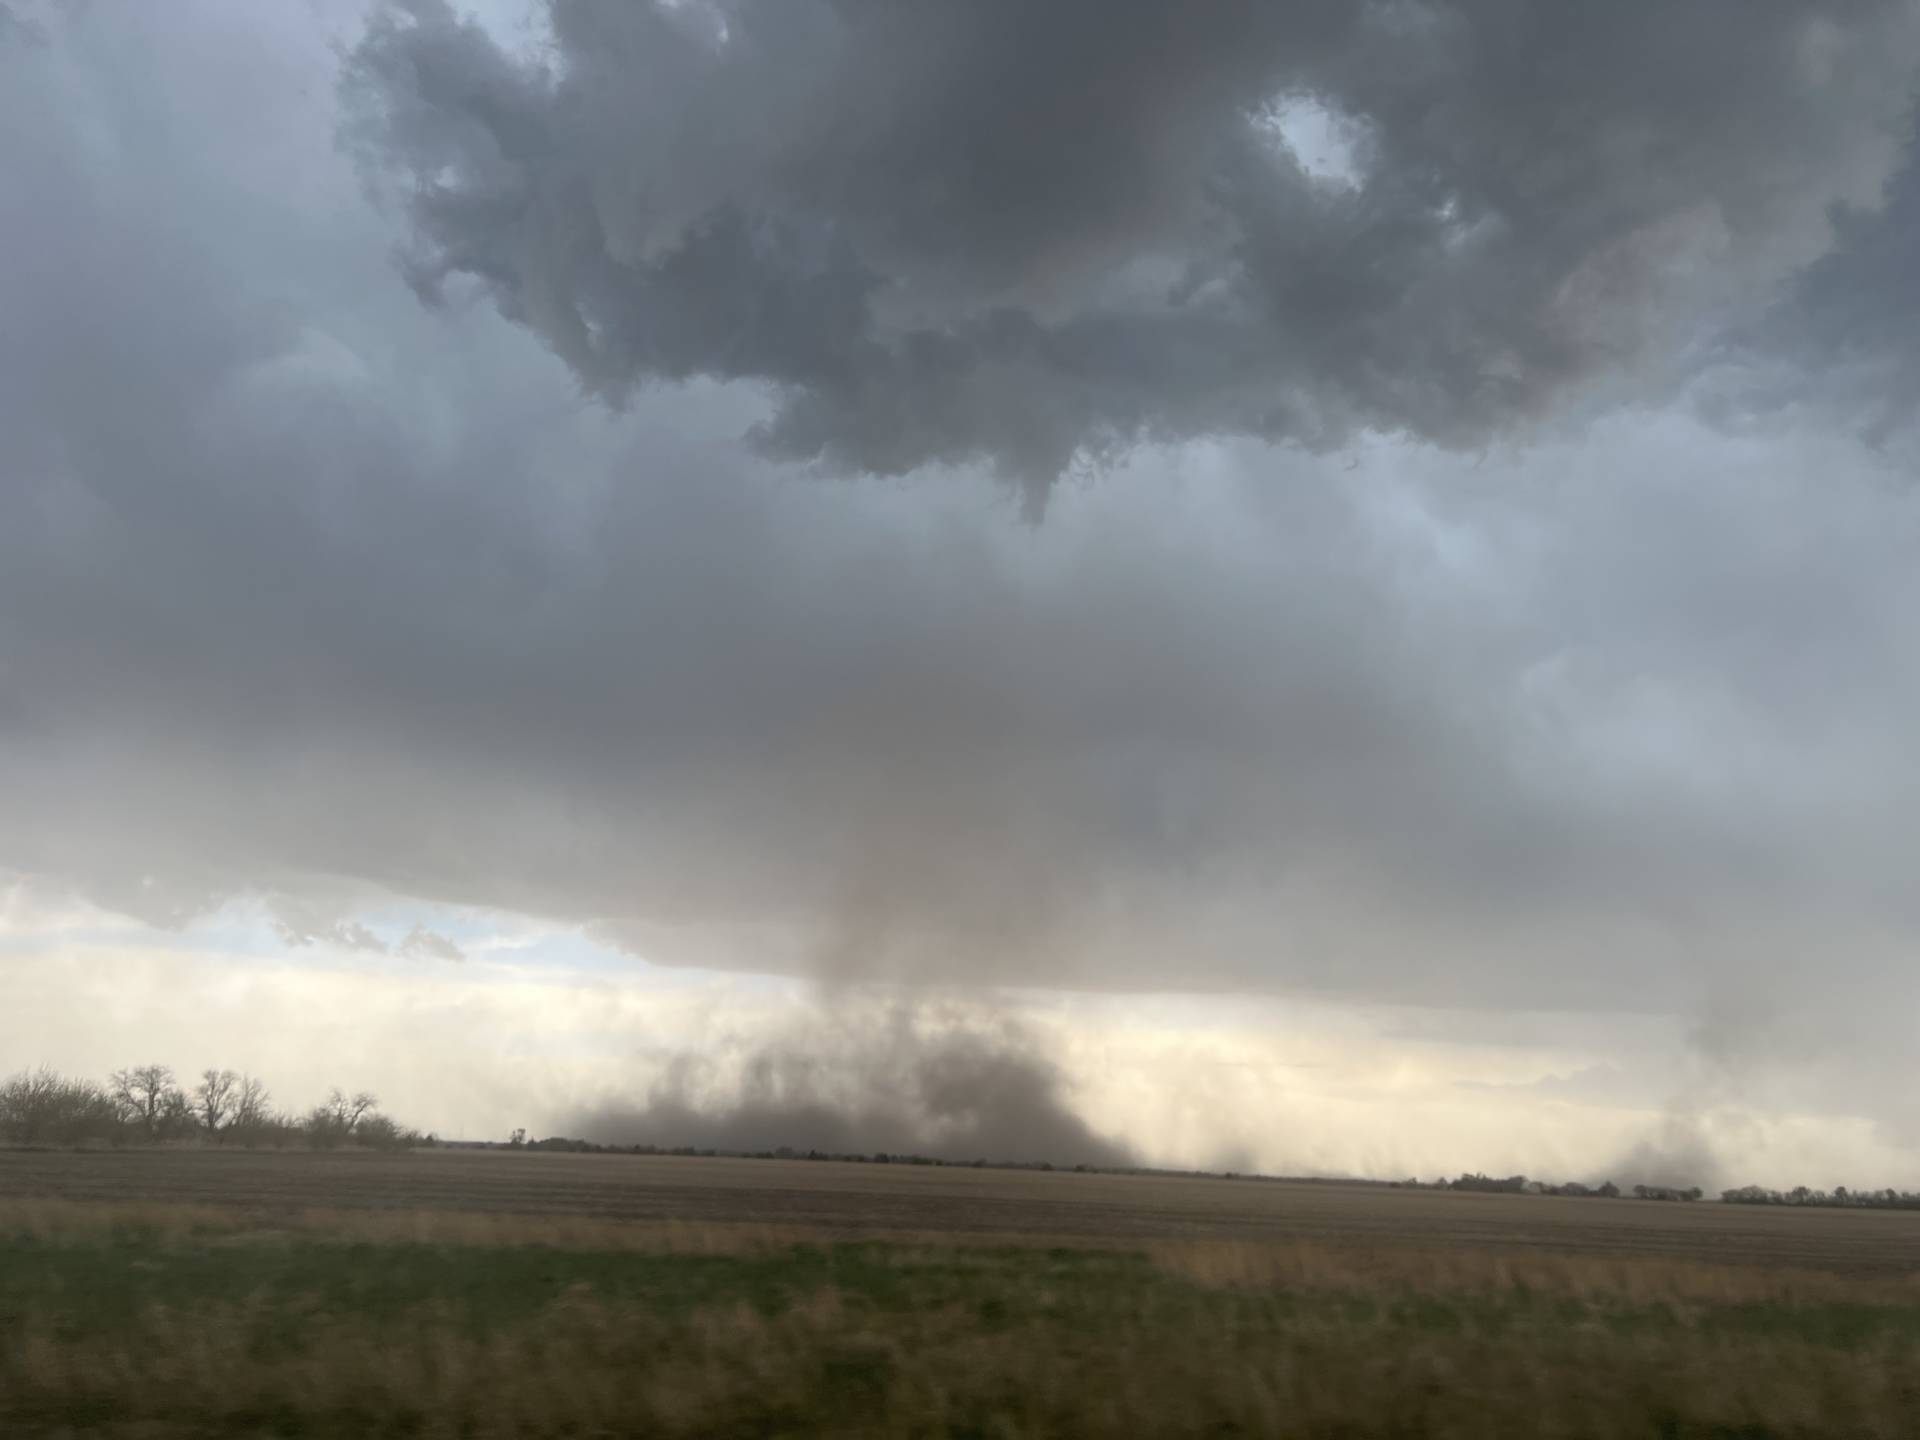 Marion, KS 05:49 PM dust being kicked up